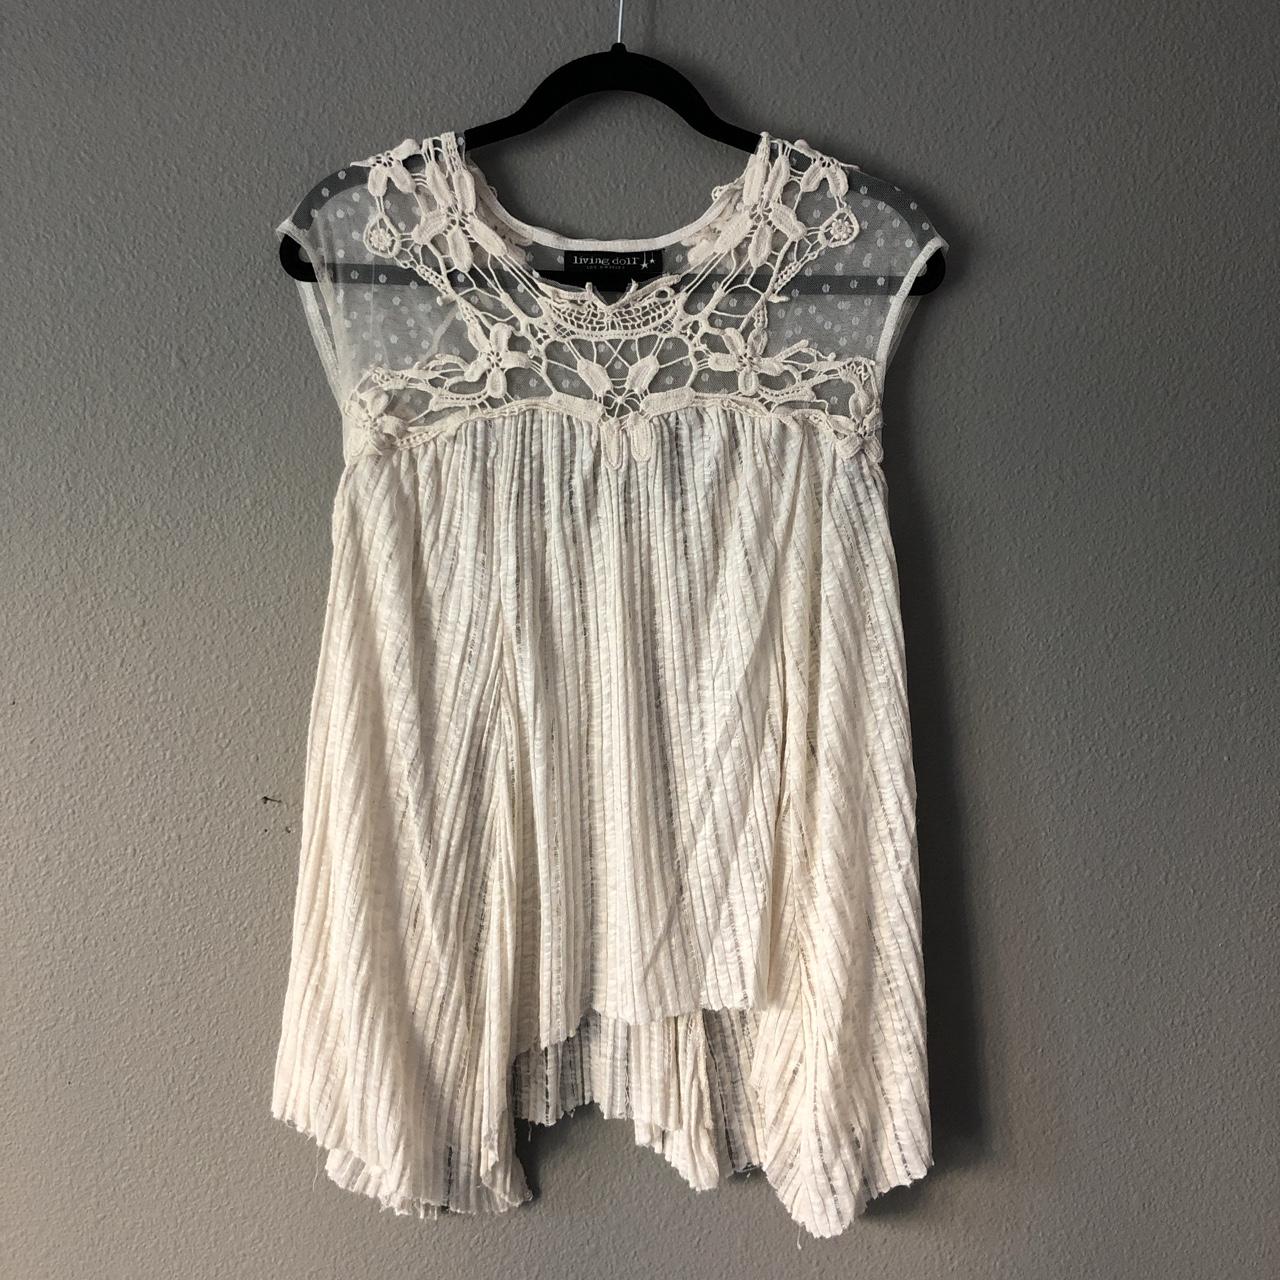 Cream colored boho chic style top with sheer lace... - Depop